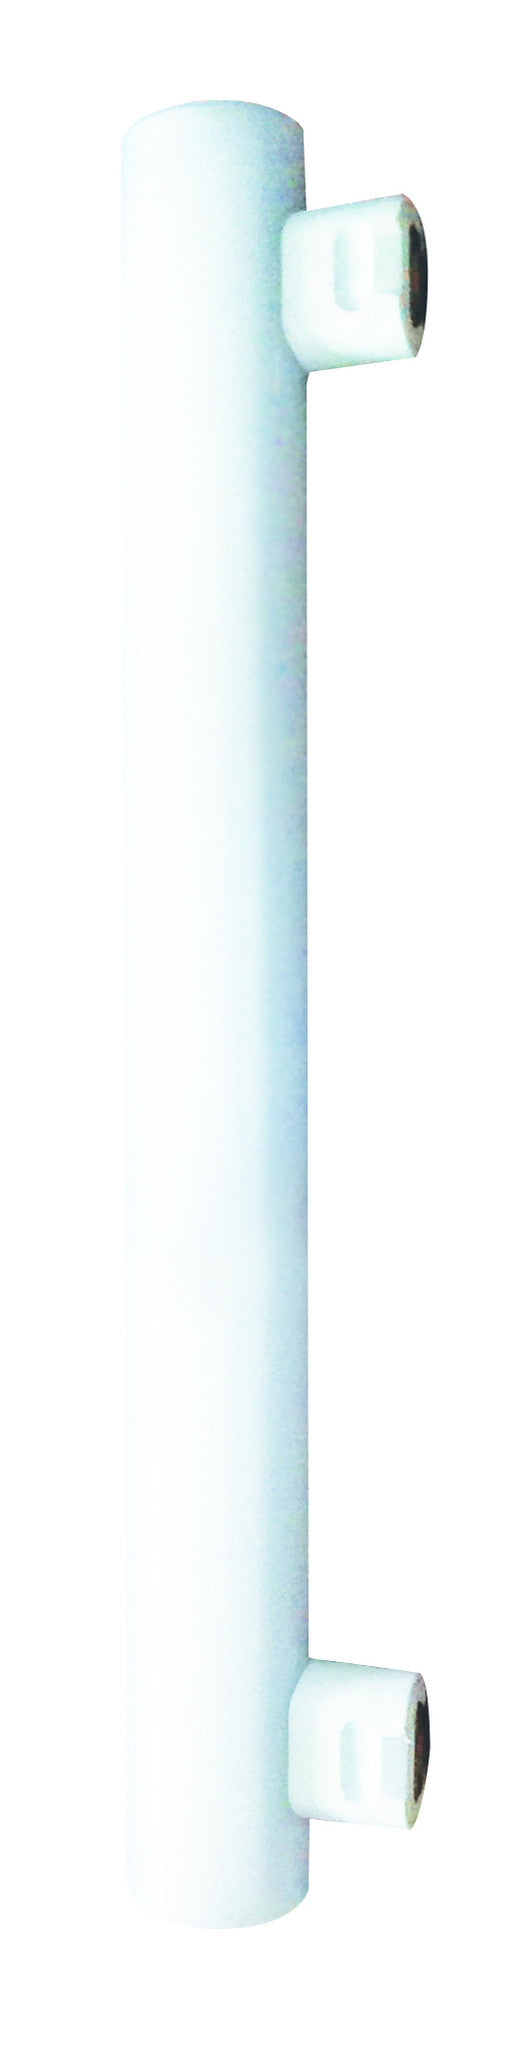 997005 - Tube Lateral LED S14S 300mm 4W 2700K 320Lm